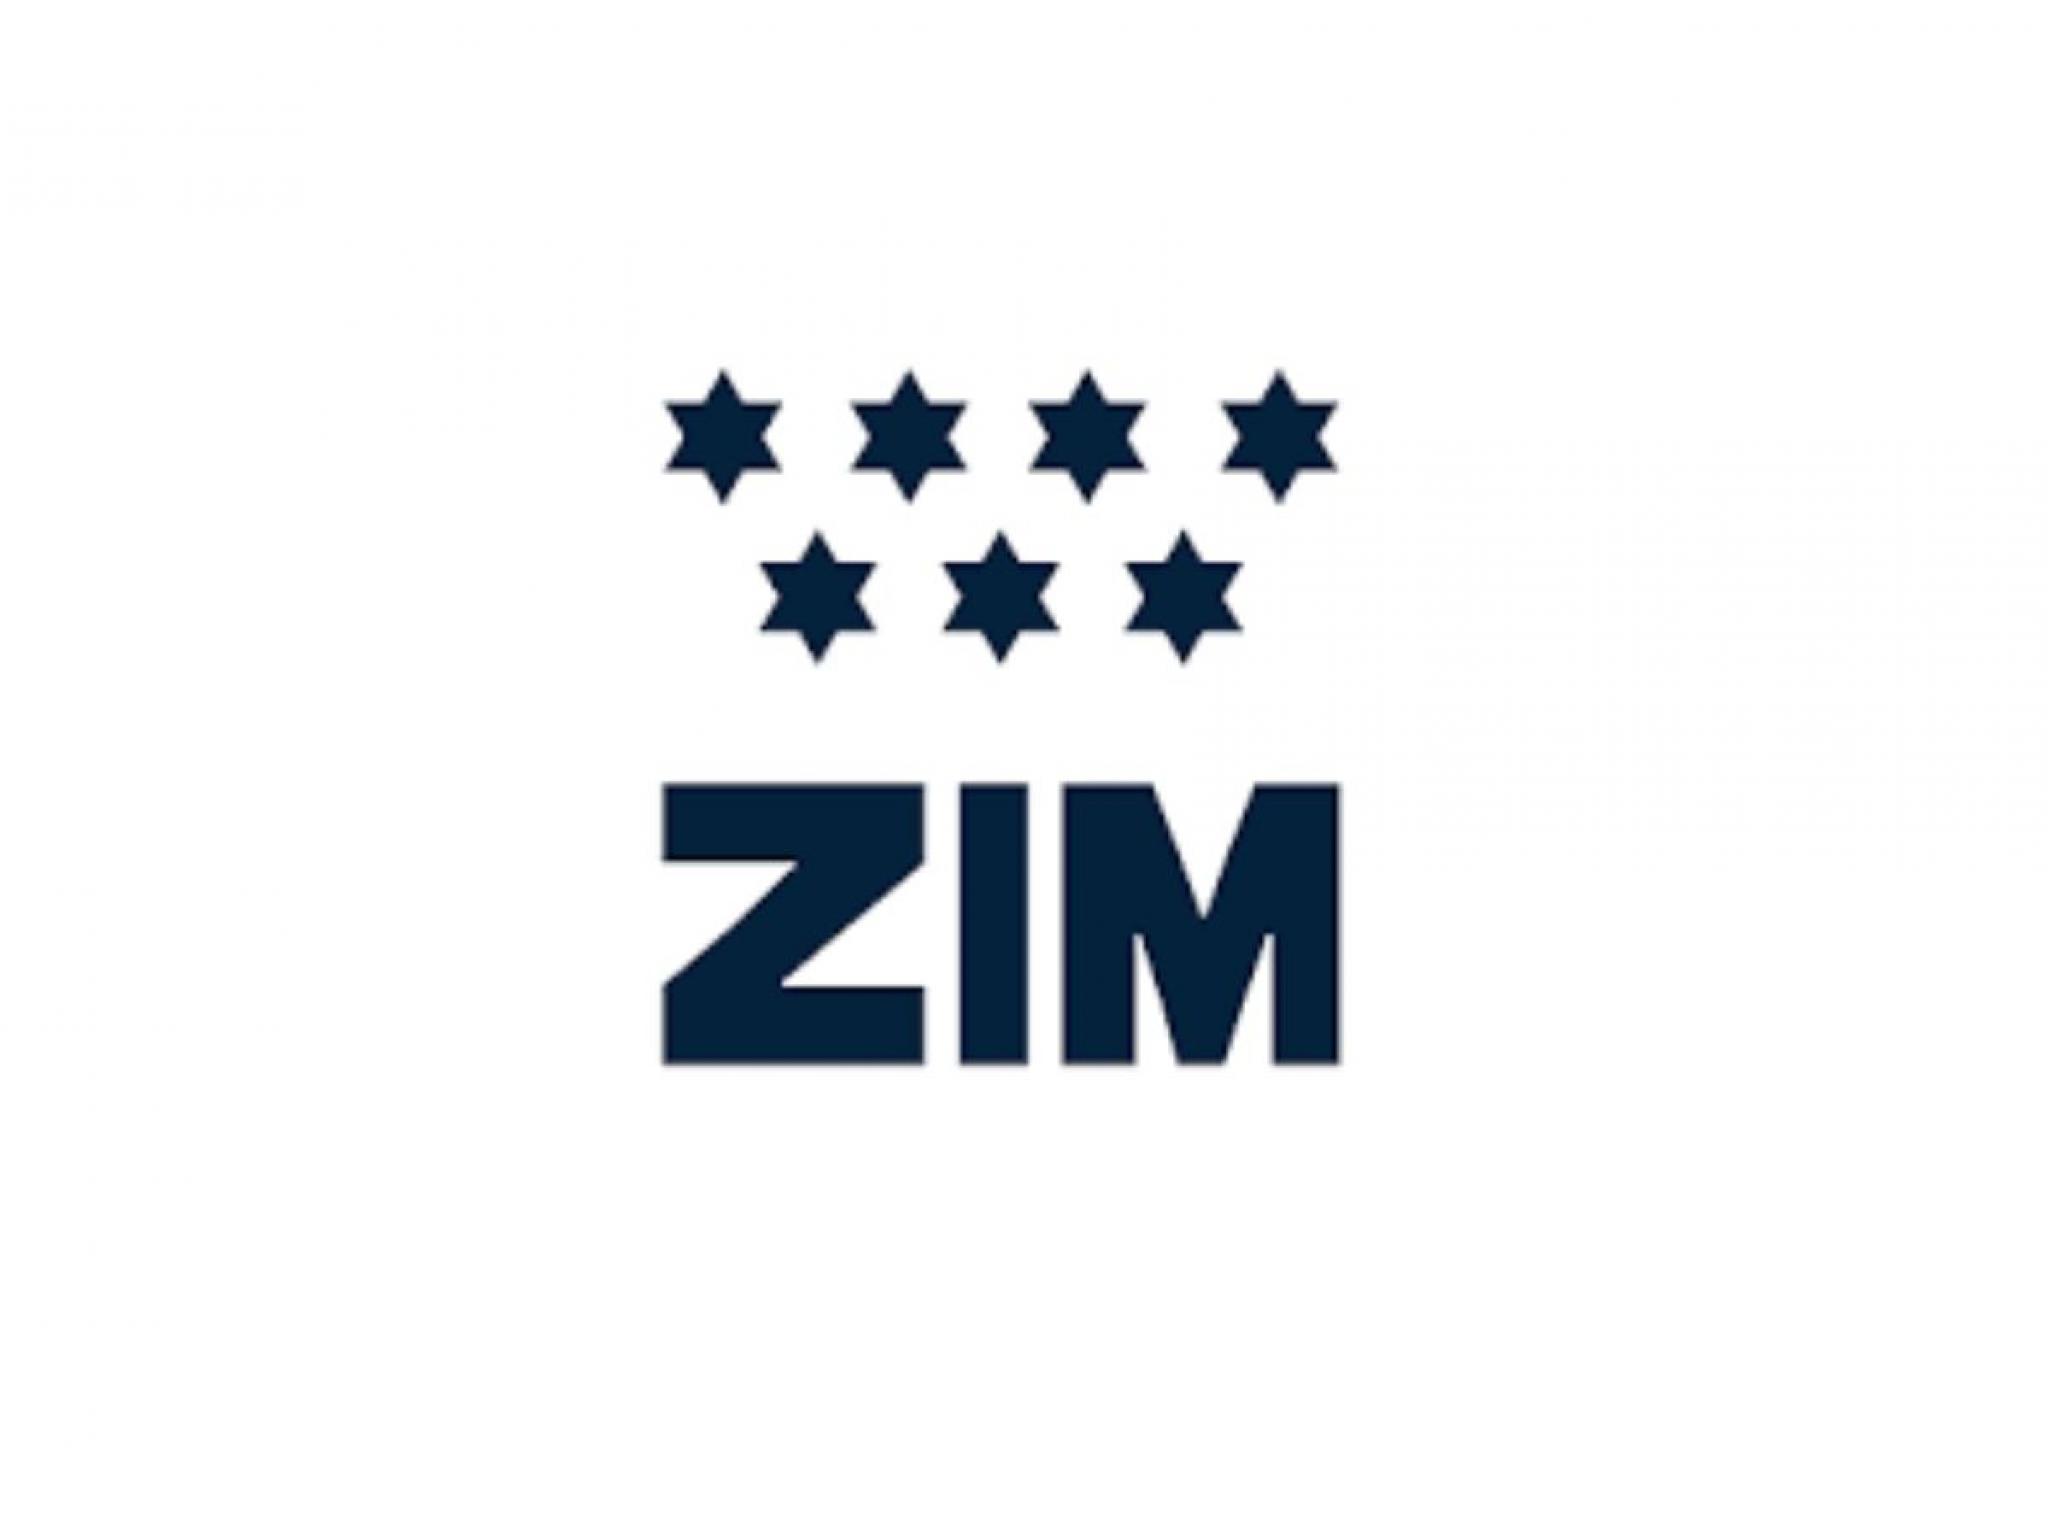  why-zim-integrated-shipping-services-shares-are-trading-lower-by-14-here-are-other-stocks-moving-in-mondays-mid-day-session 